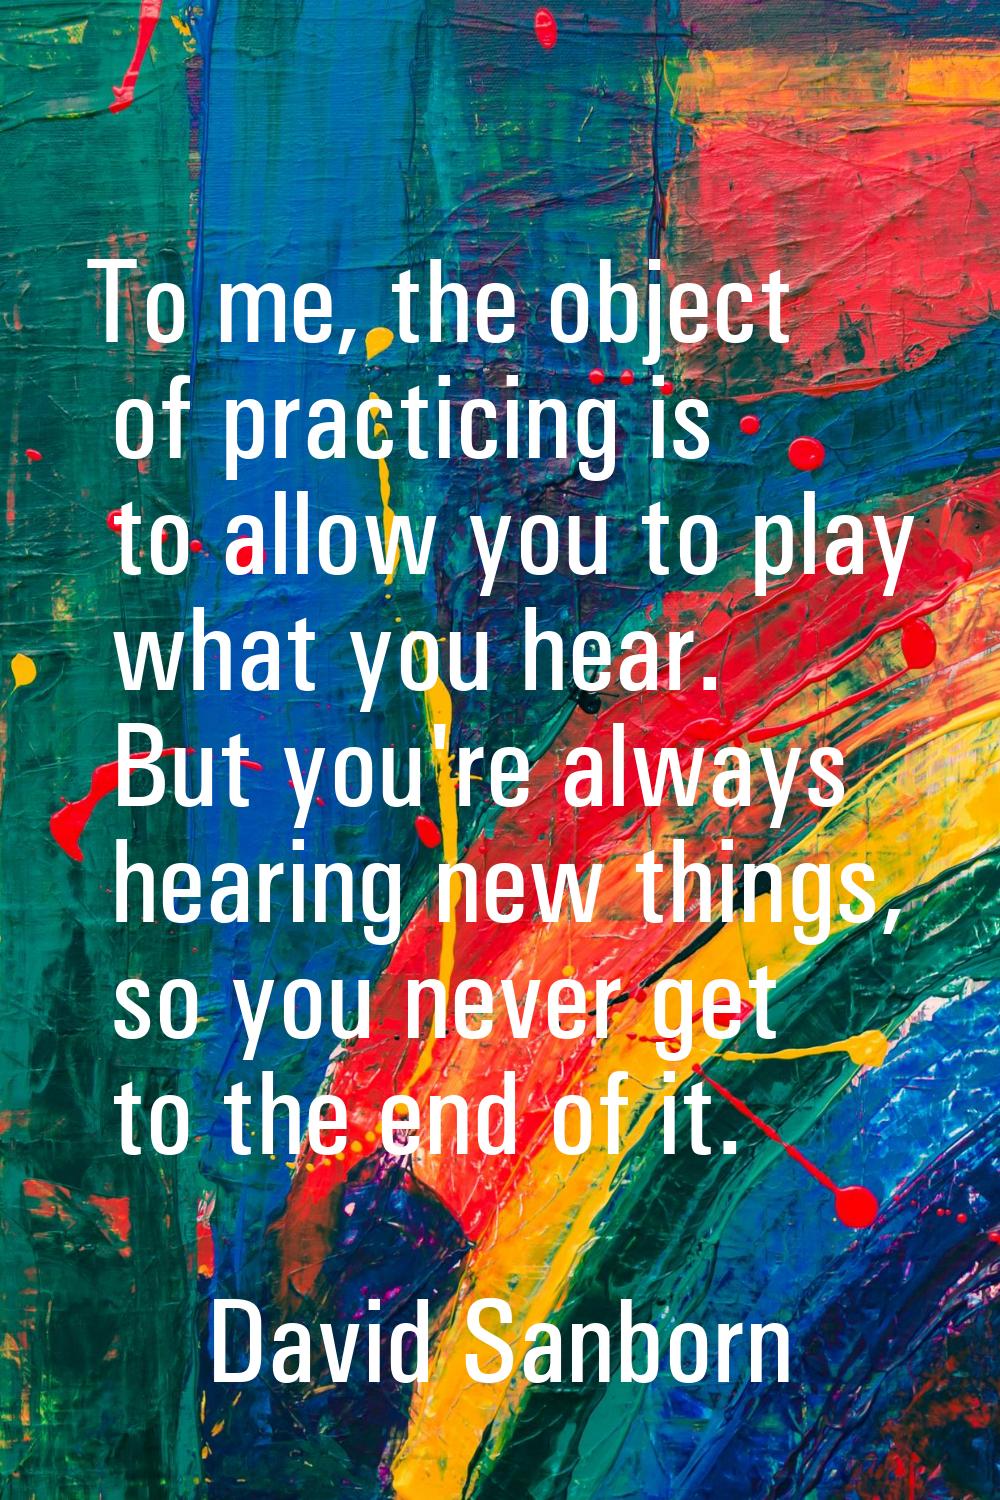 To me, the object of practicing is to allow you to play what you hear. But you're always hearing ne